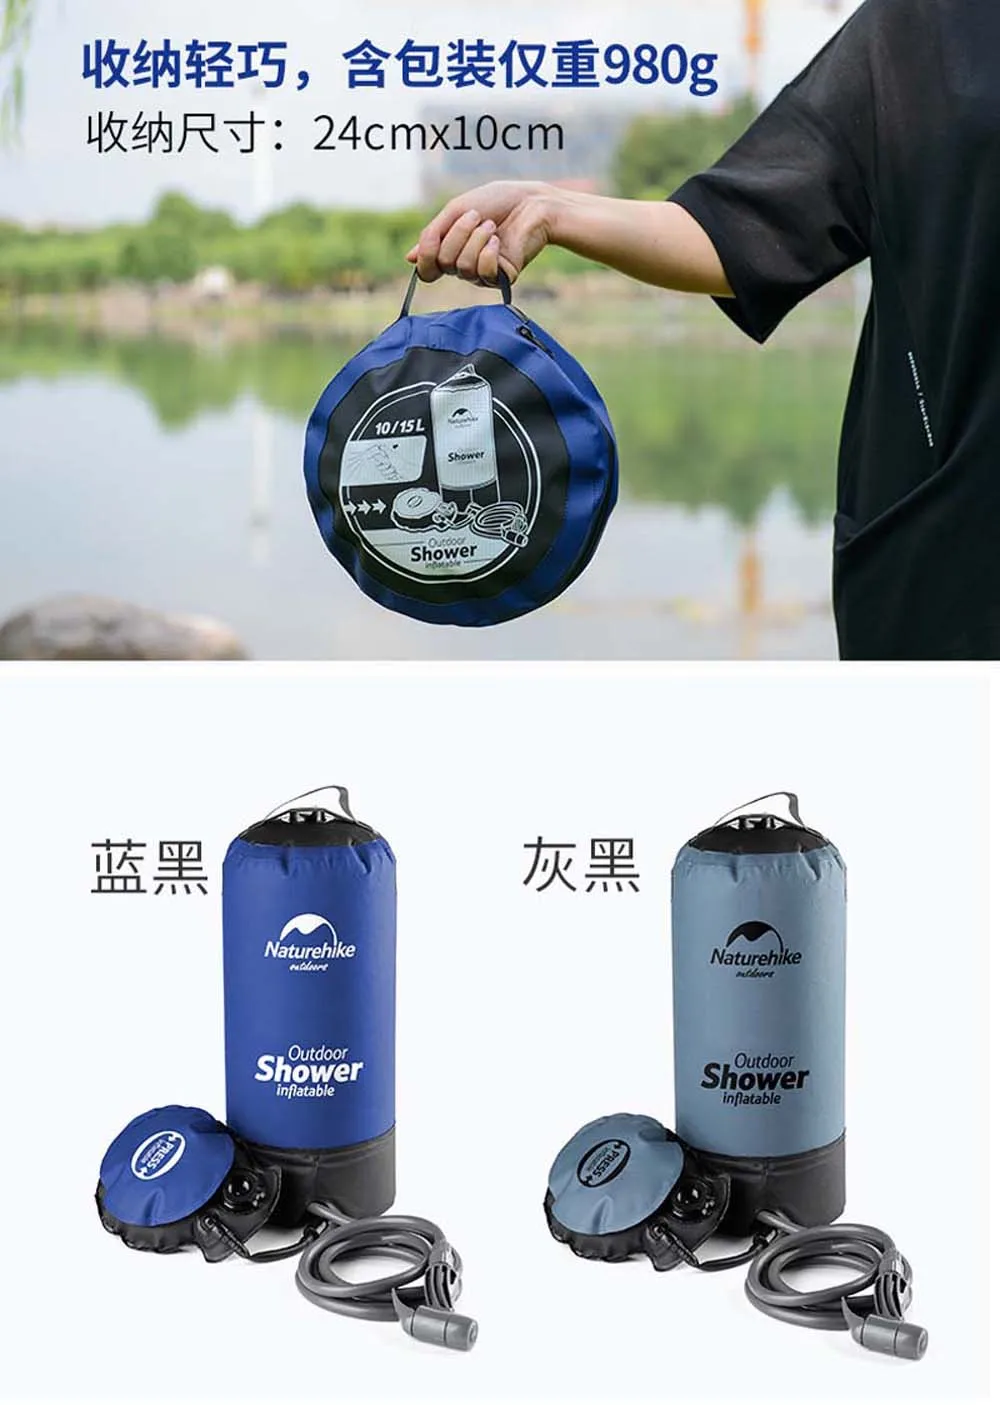 Portable Inflatable Outdoor Shower Bag Folding Barrel Camping Water Storage 11L 